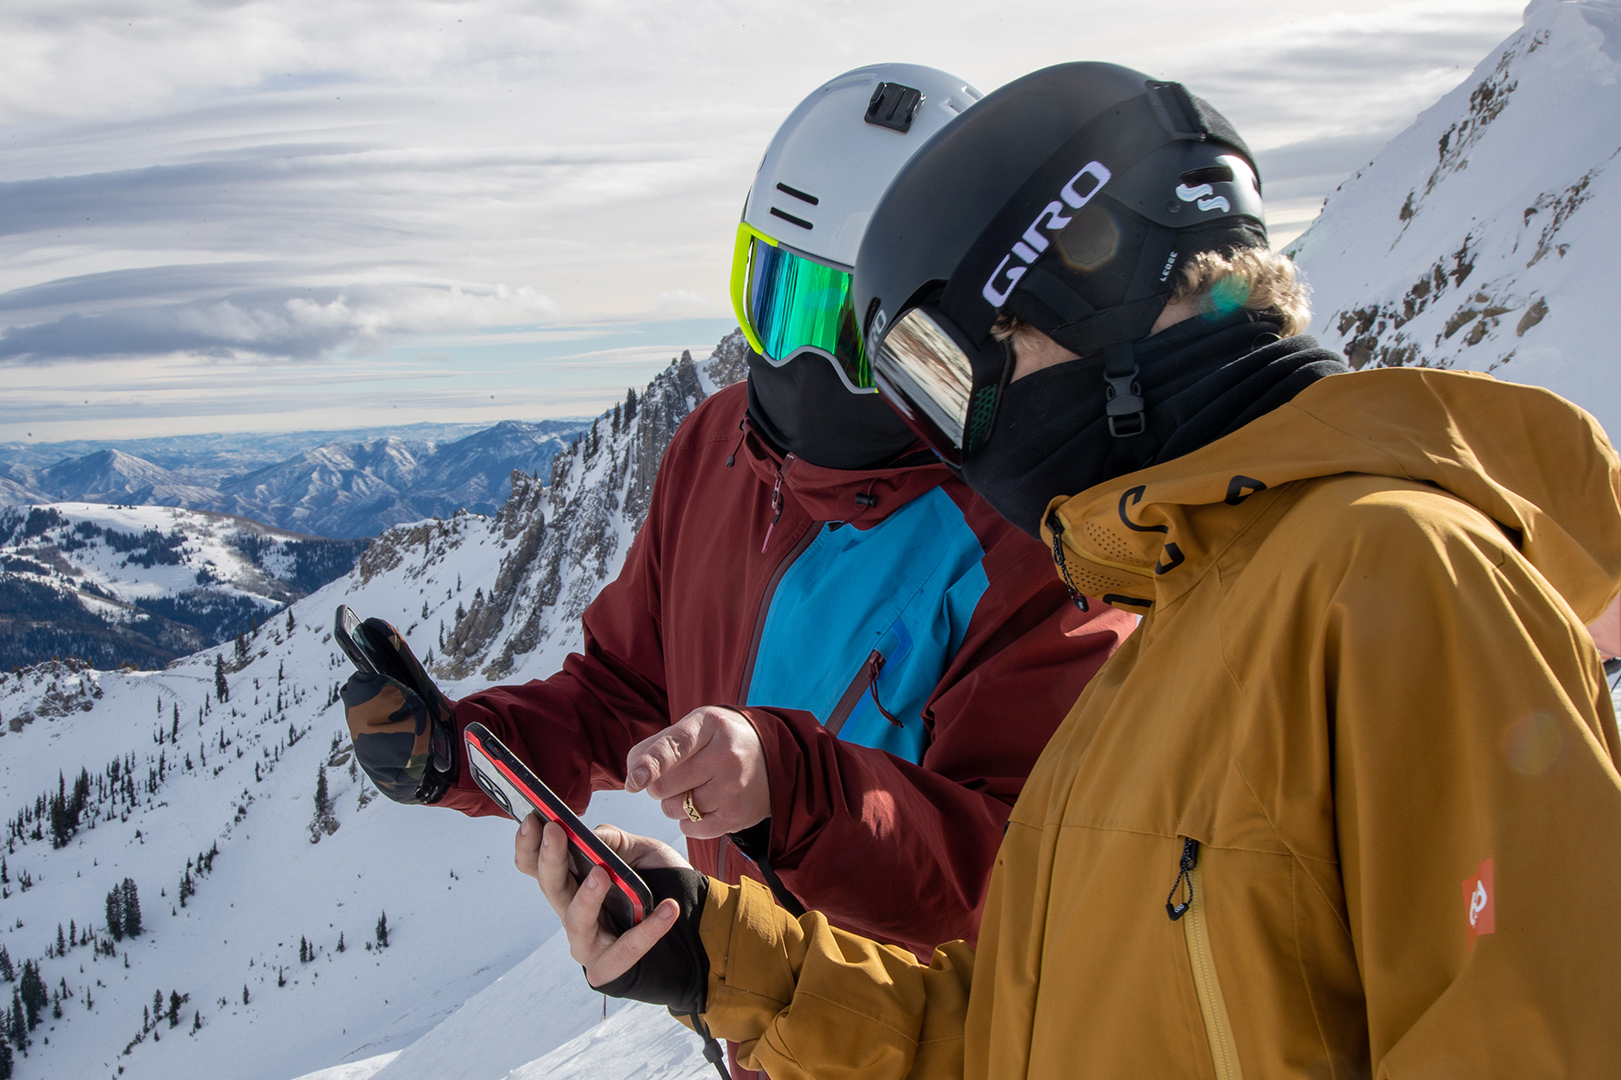 skiers using phones to route find at Snowbird